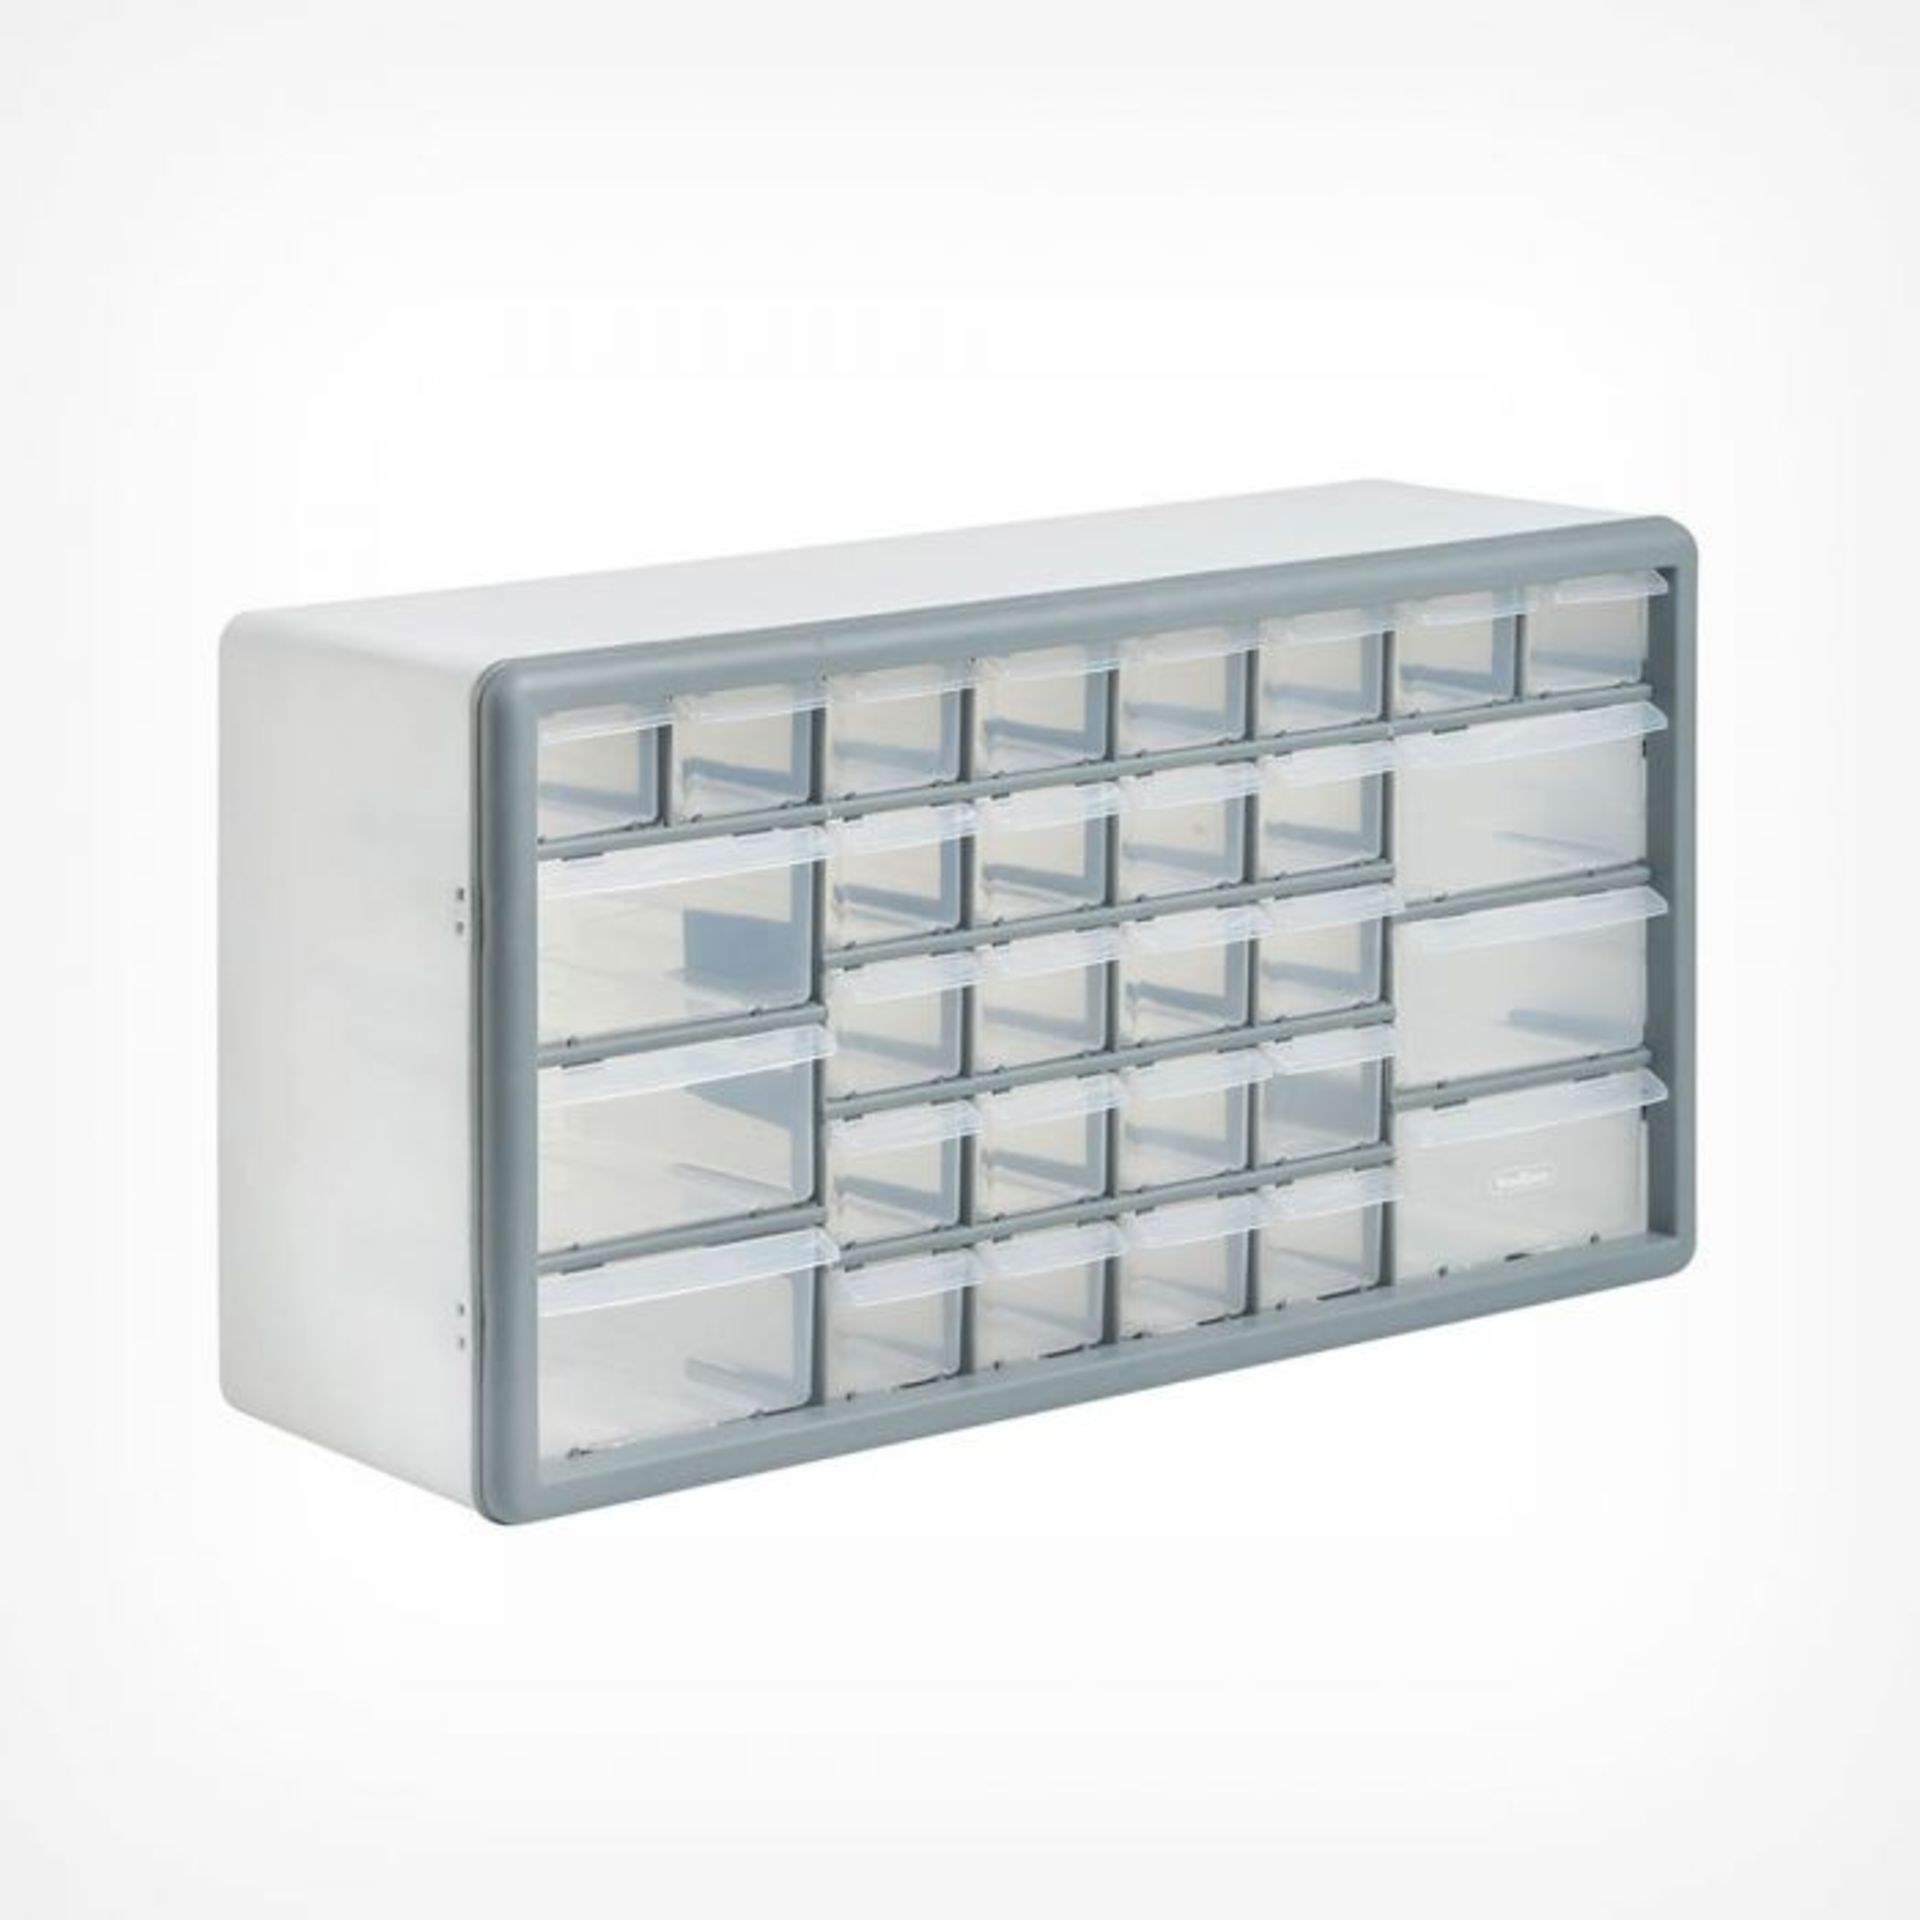 (S363) White 30 Drawer Organiser Perfect for storing small parts such as nuts, bolts, screws, ... - Image 2 of 4